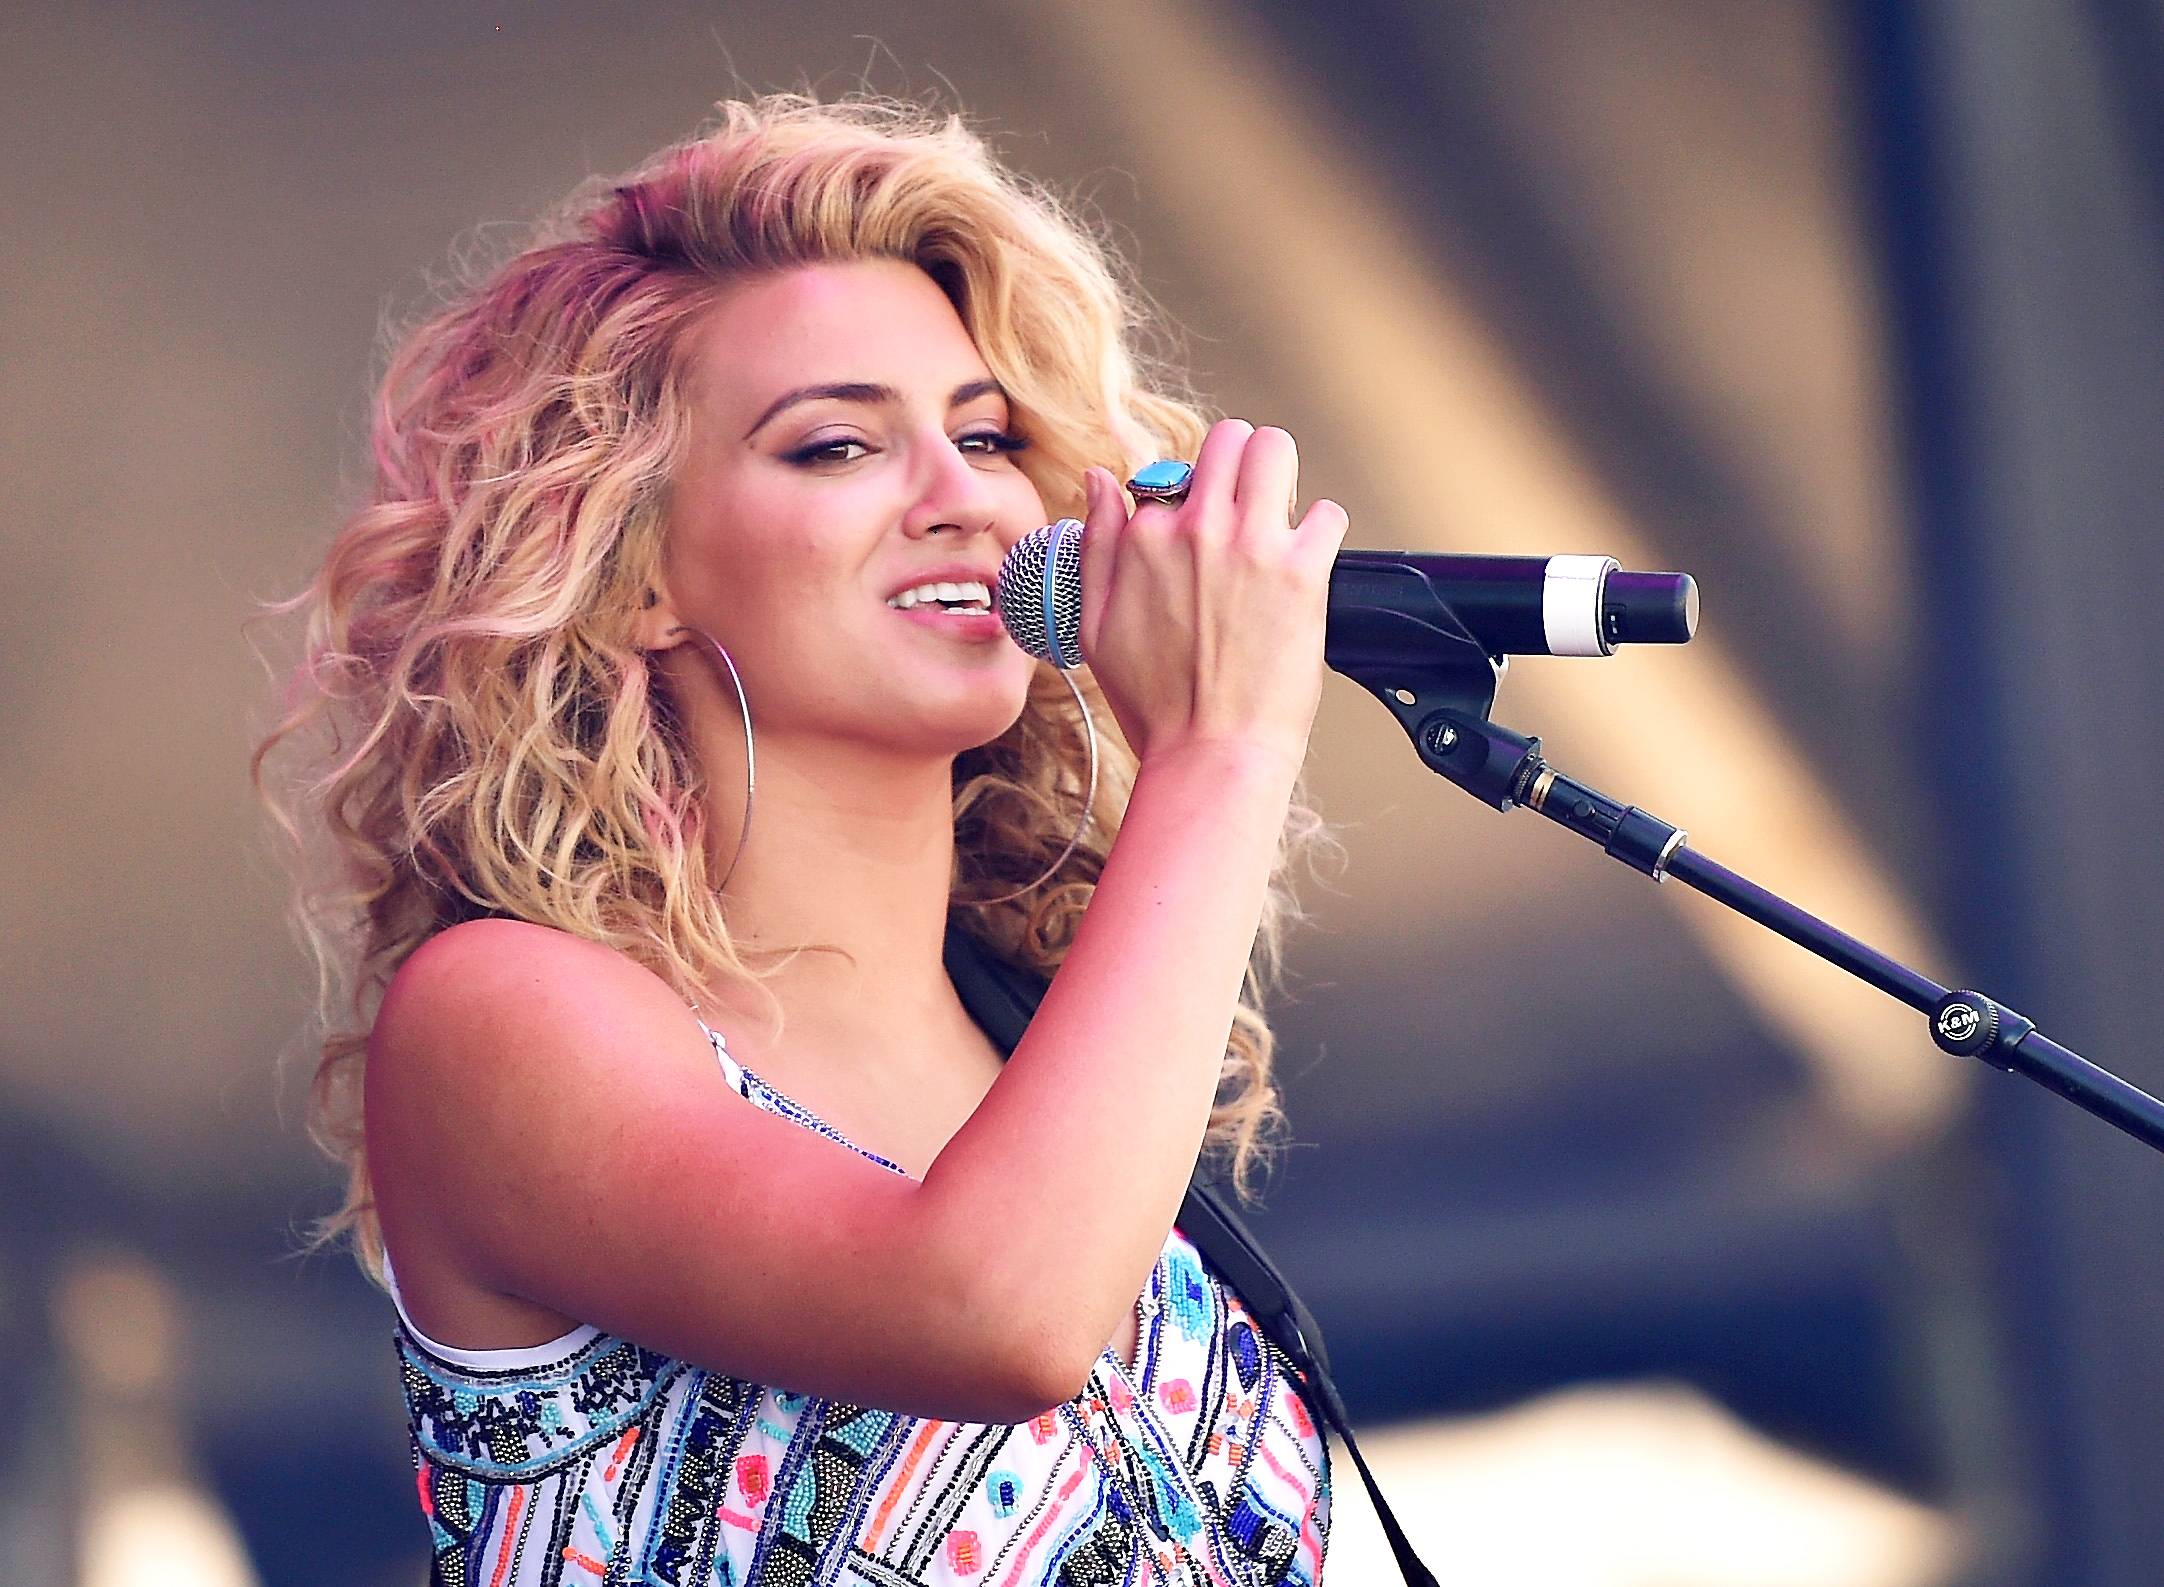 4. Live! - Tori Kelly is amongst the small group of talented artists that can really blow at a live show. (Photo: Mike Windle/Getty Images for iHeartMedia)